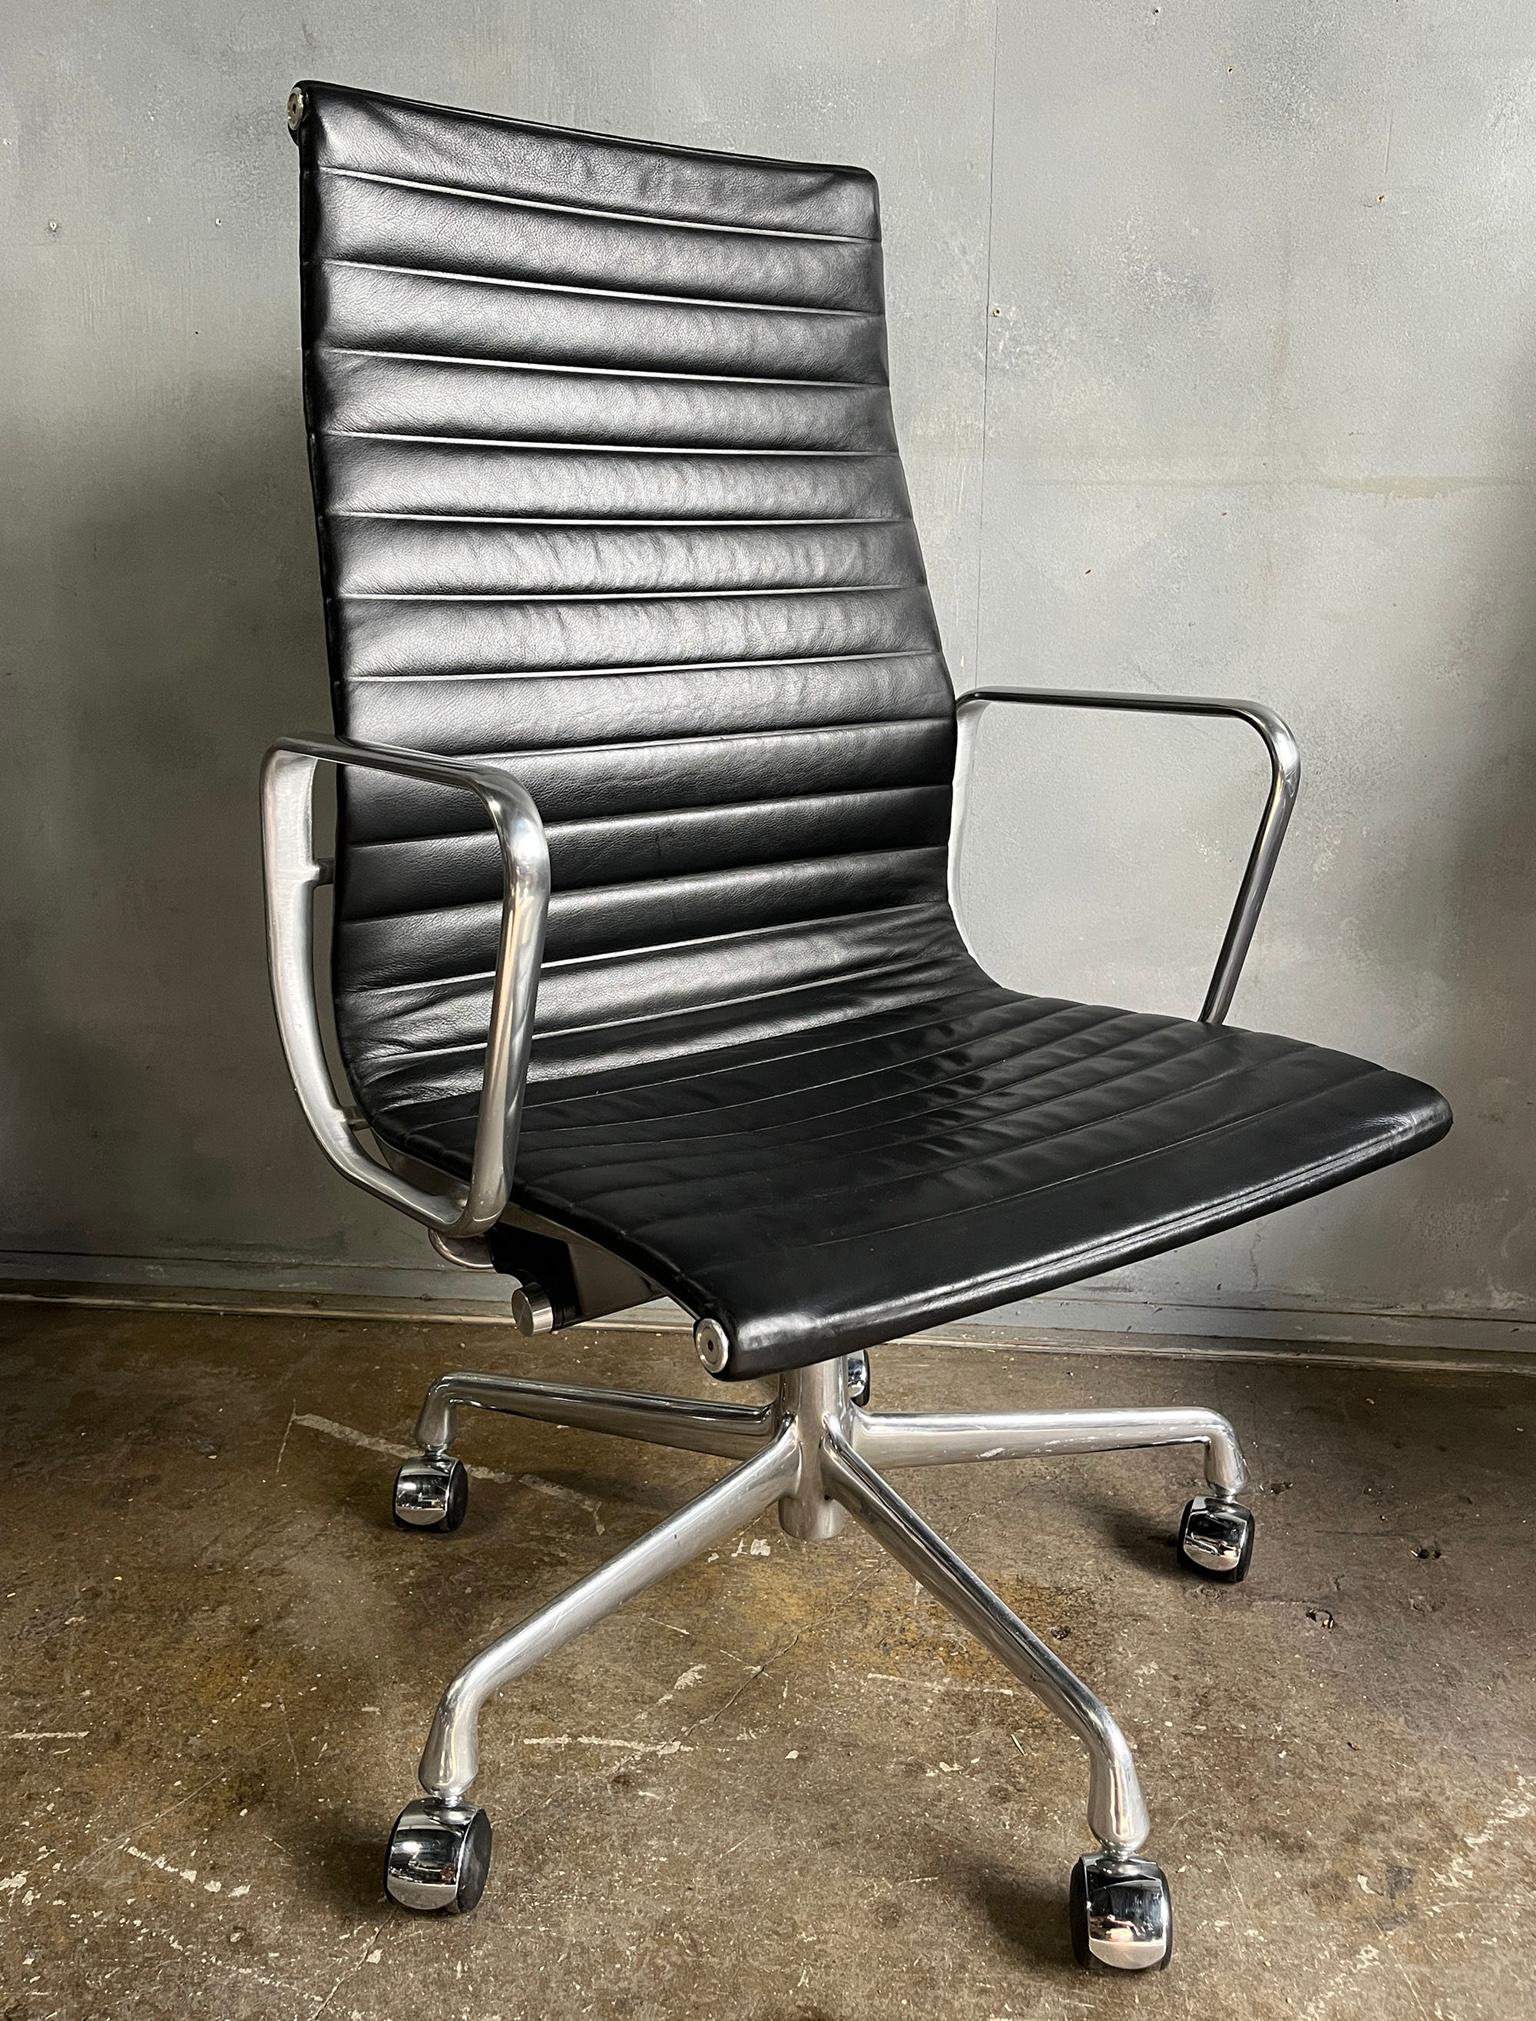 Ask for custom shipping quote

An icon of Mid-Century Modern design that continues to be produced today. Manual height and tilt. 50th anniversary addition premium black leather that is thicker and softer than other aluminum group chairs and aluminum